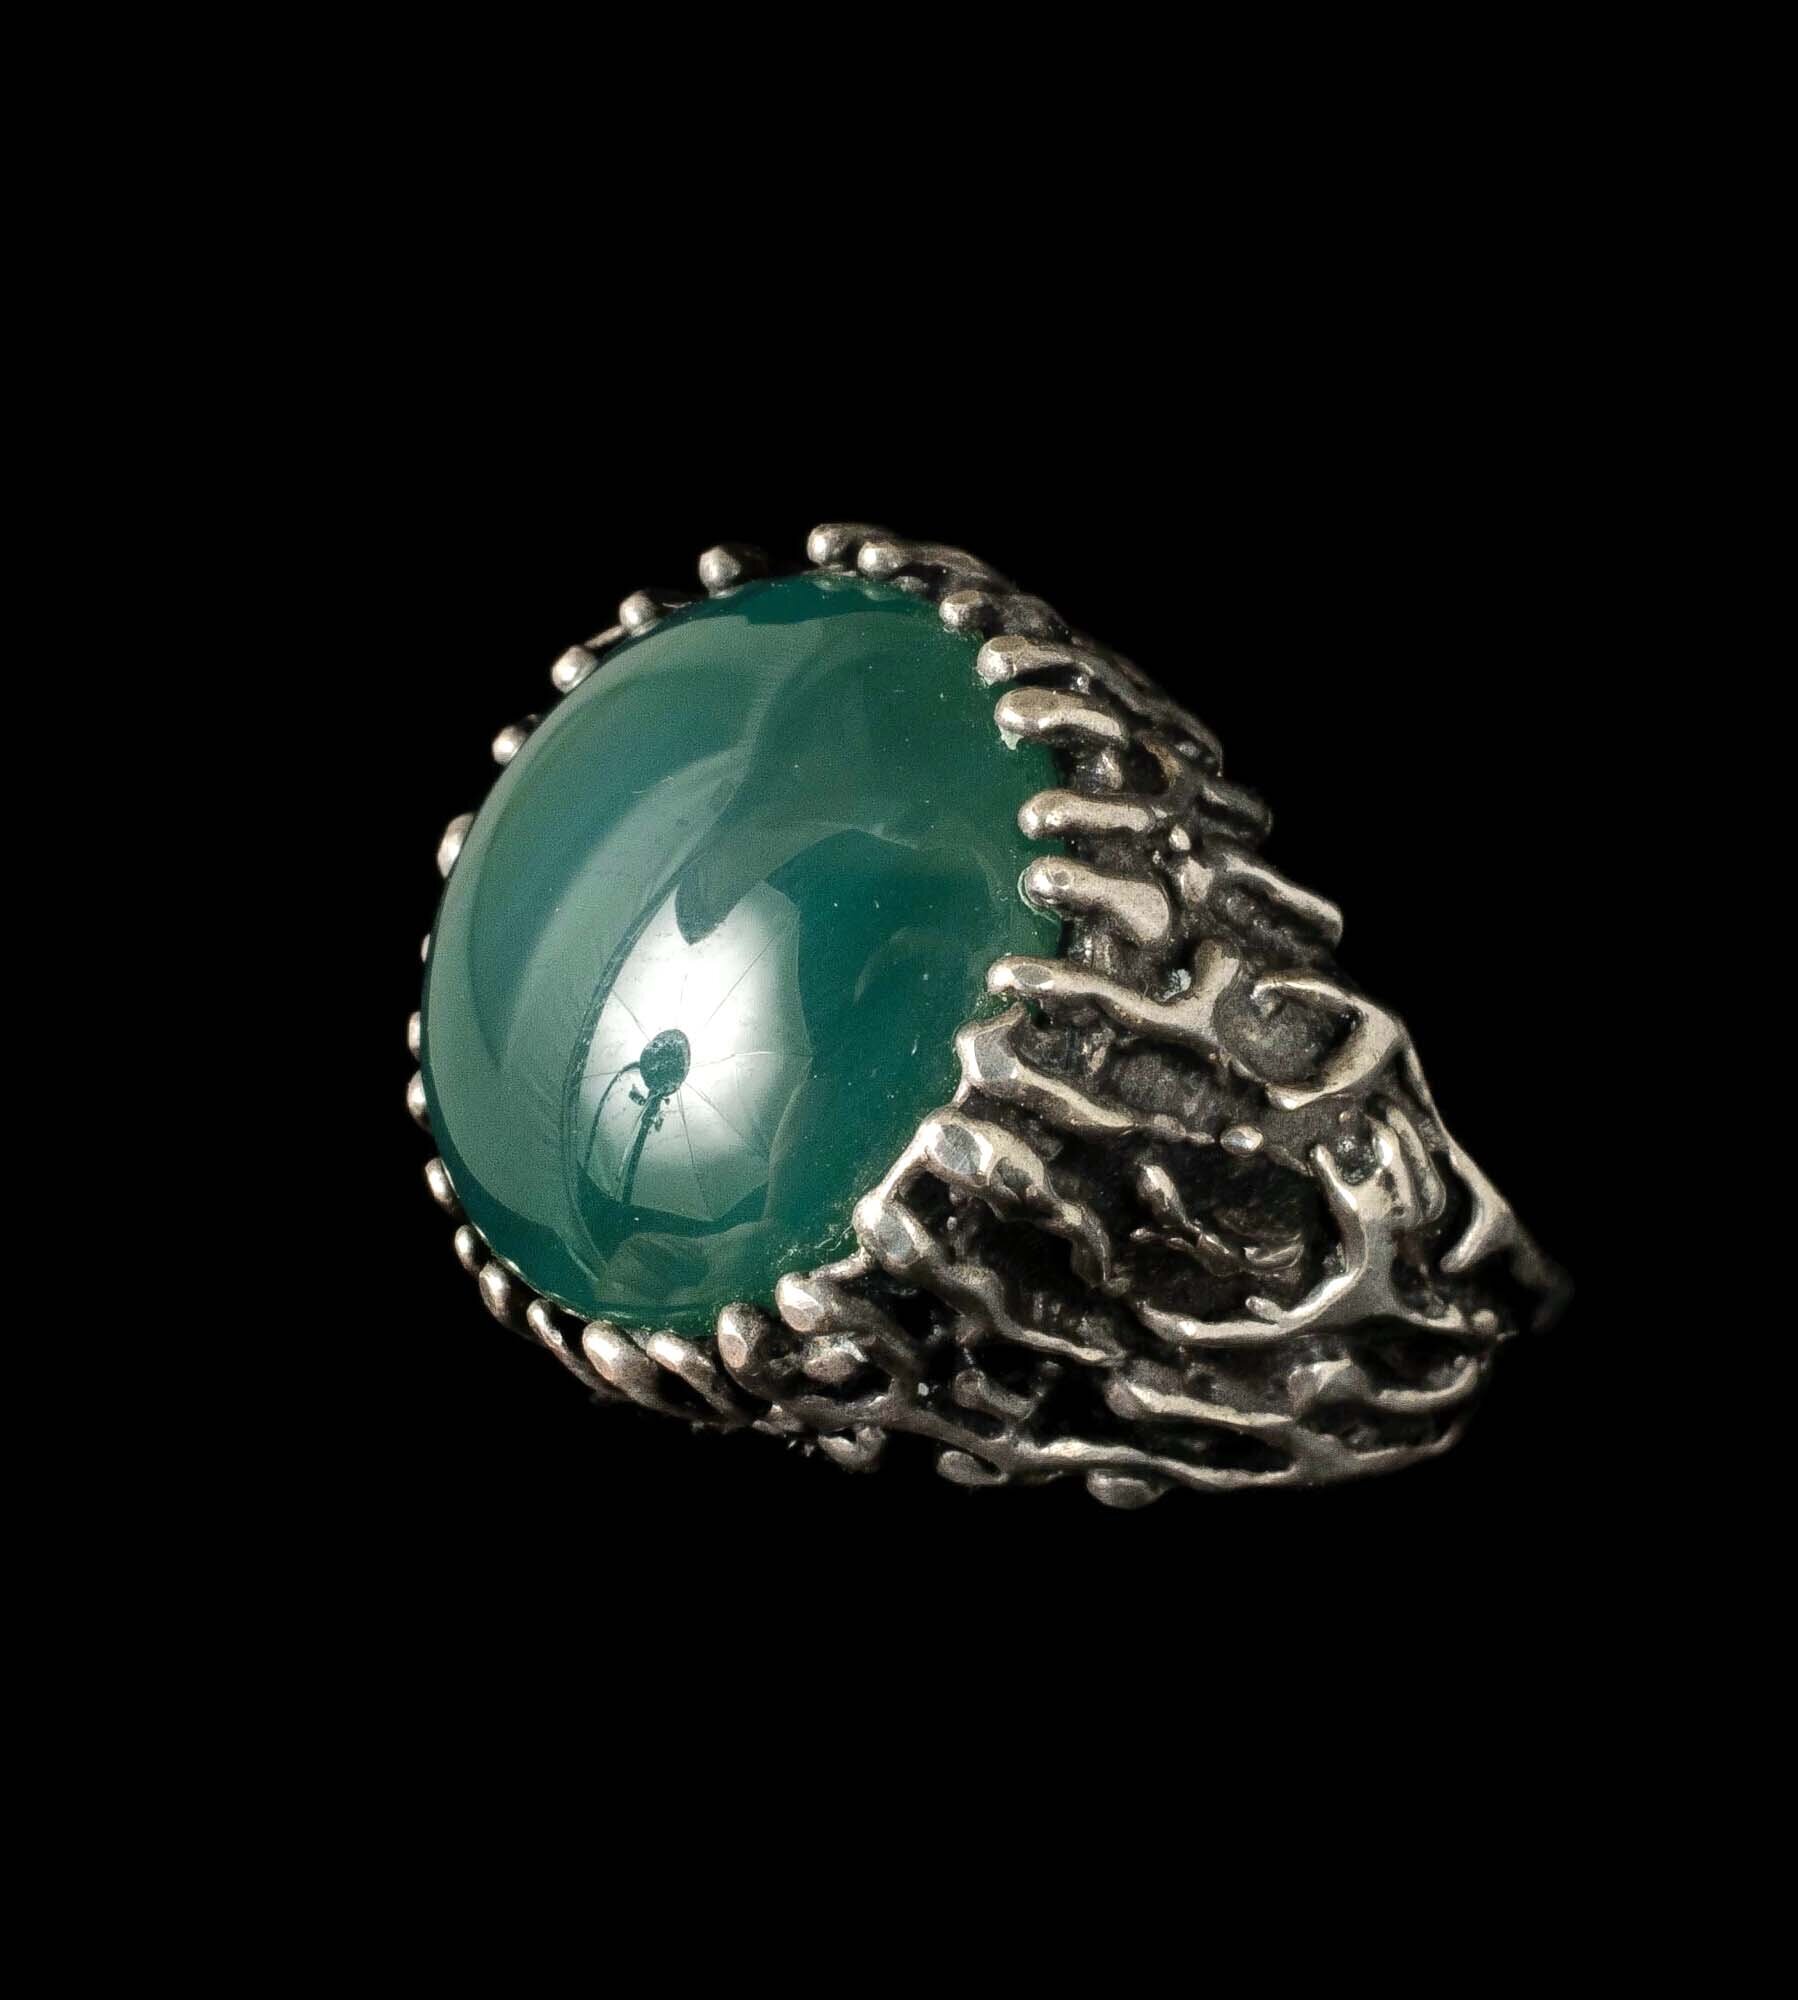 1970s European brutalist silver and chrysoprase Ring